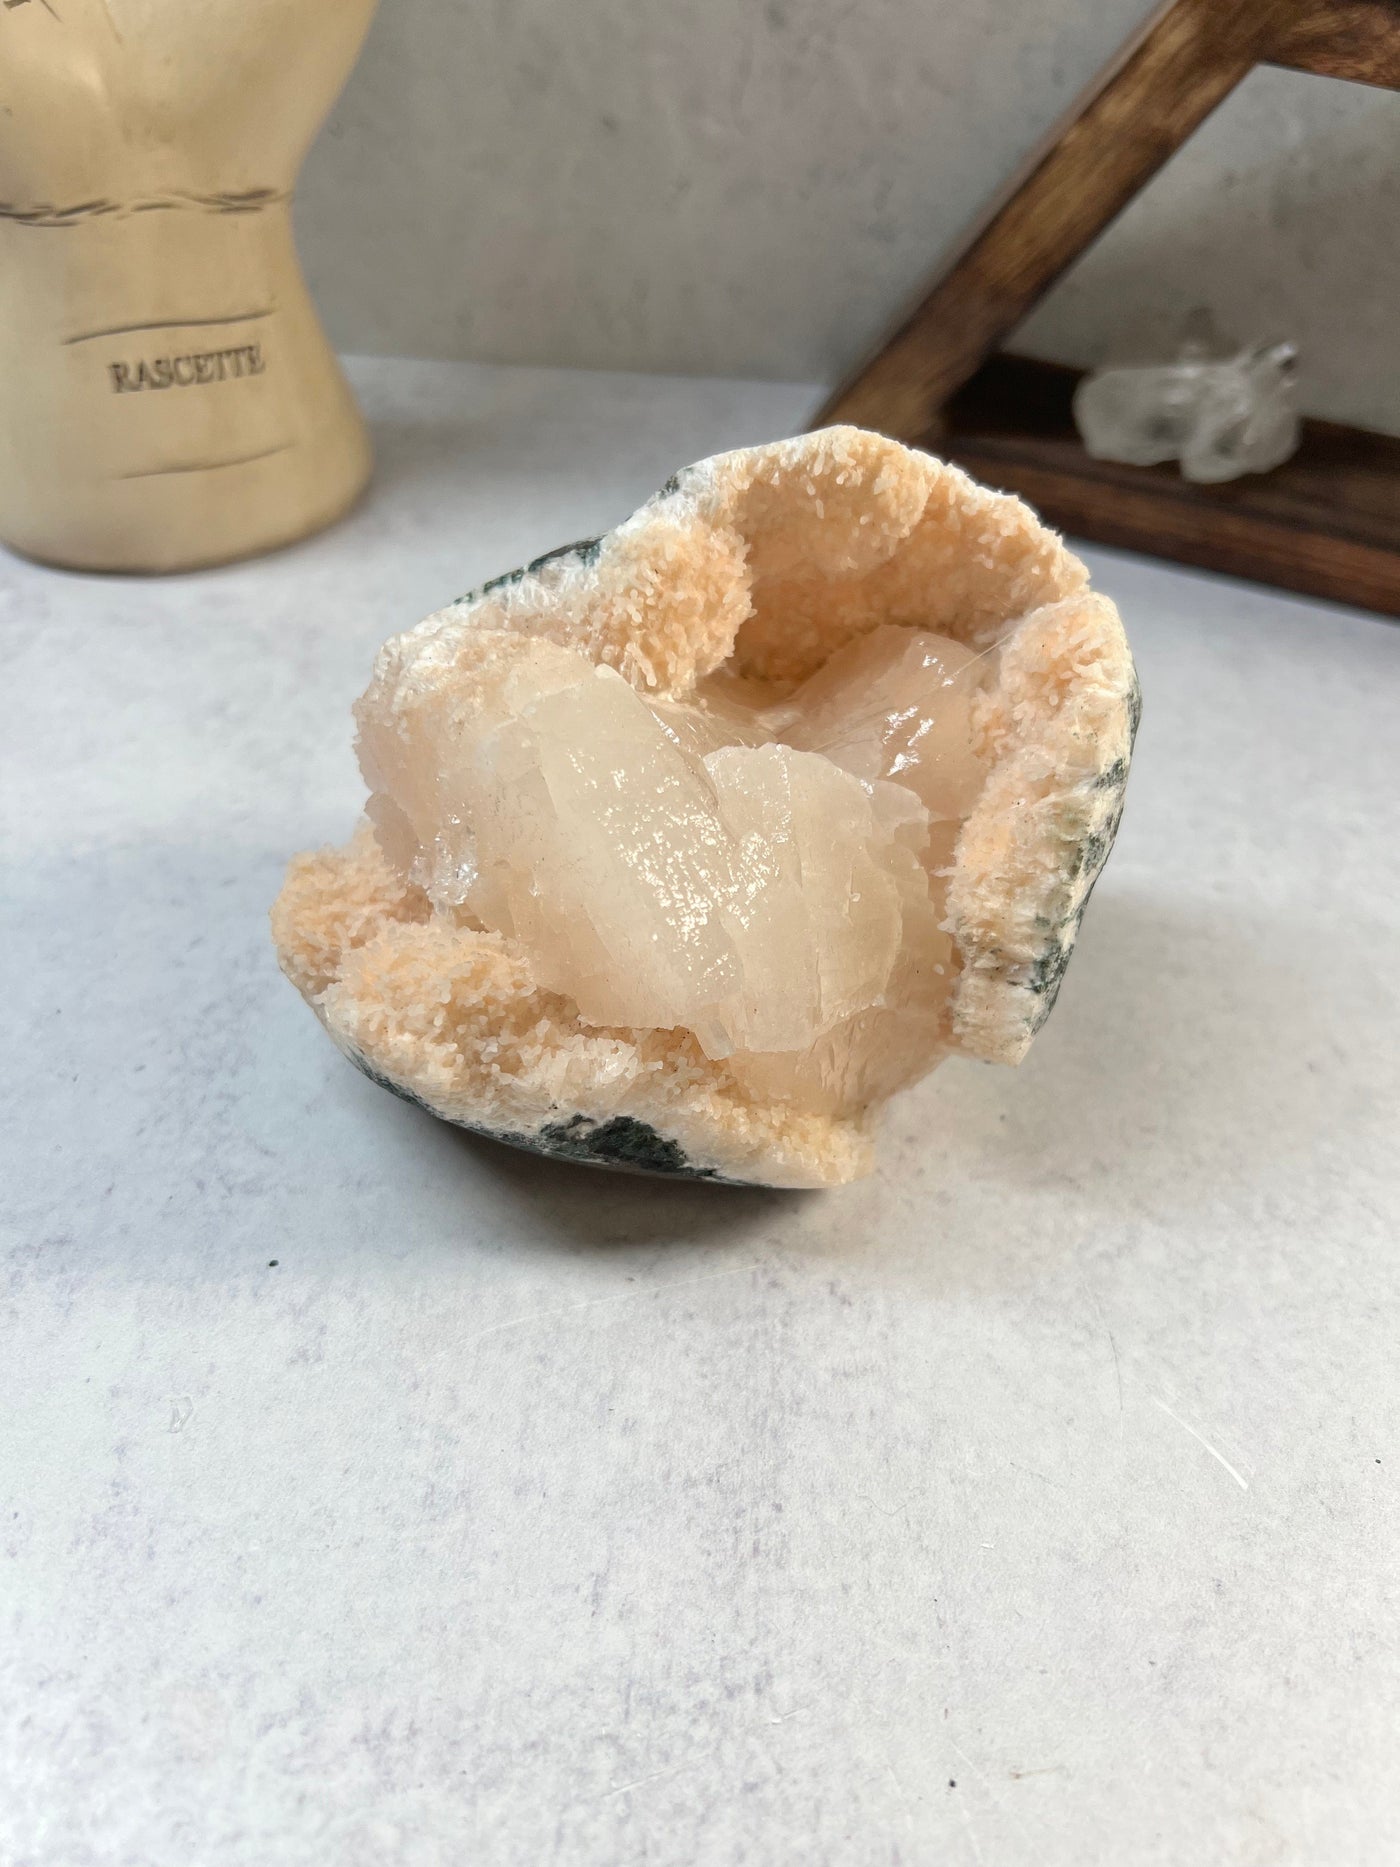 stilbite on matrix with decorations in the background